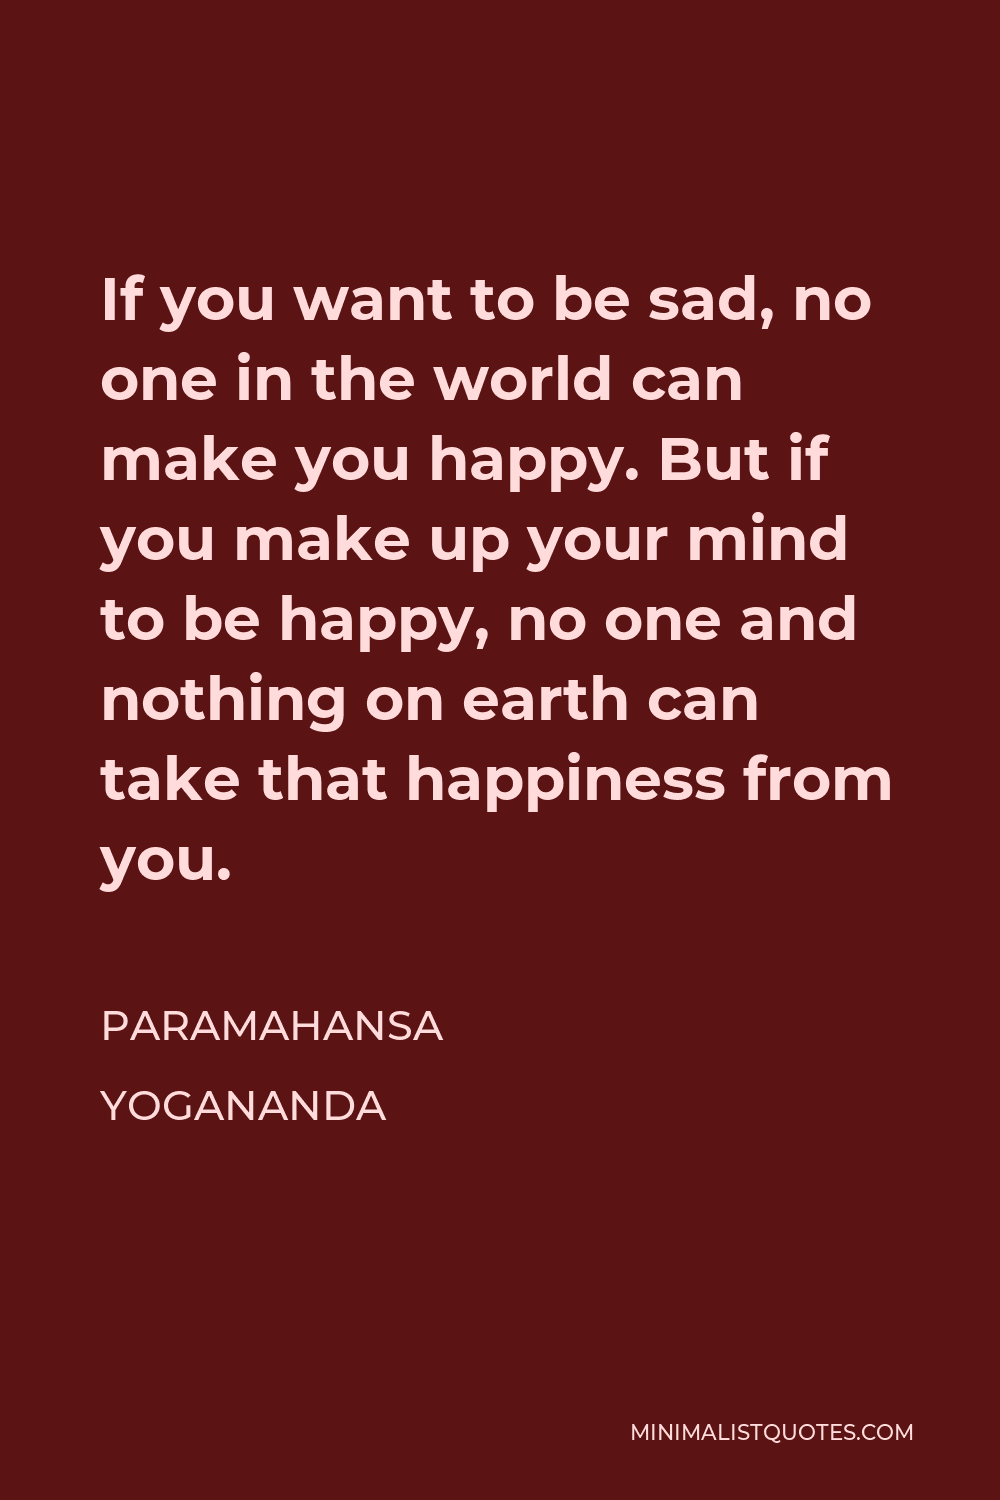 Paramahansa Yogananda Quote - If you want to be sad, no one in the world can make you happy. But if you make up your mind to be happy, no one and nothing on earth can take that happiness from you.